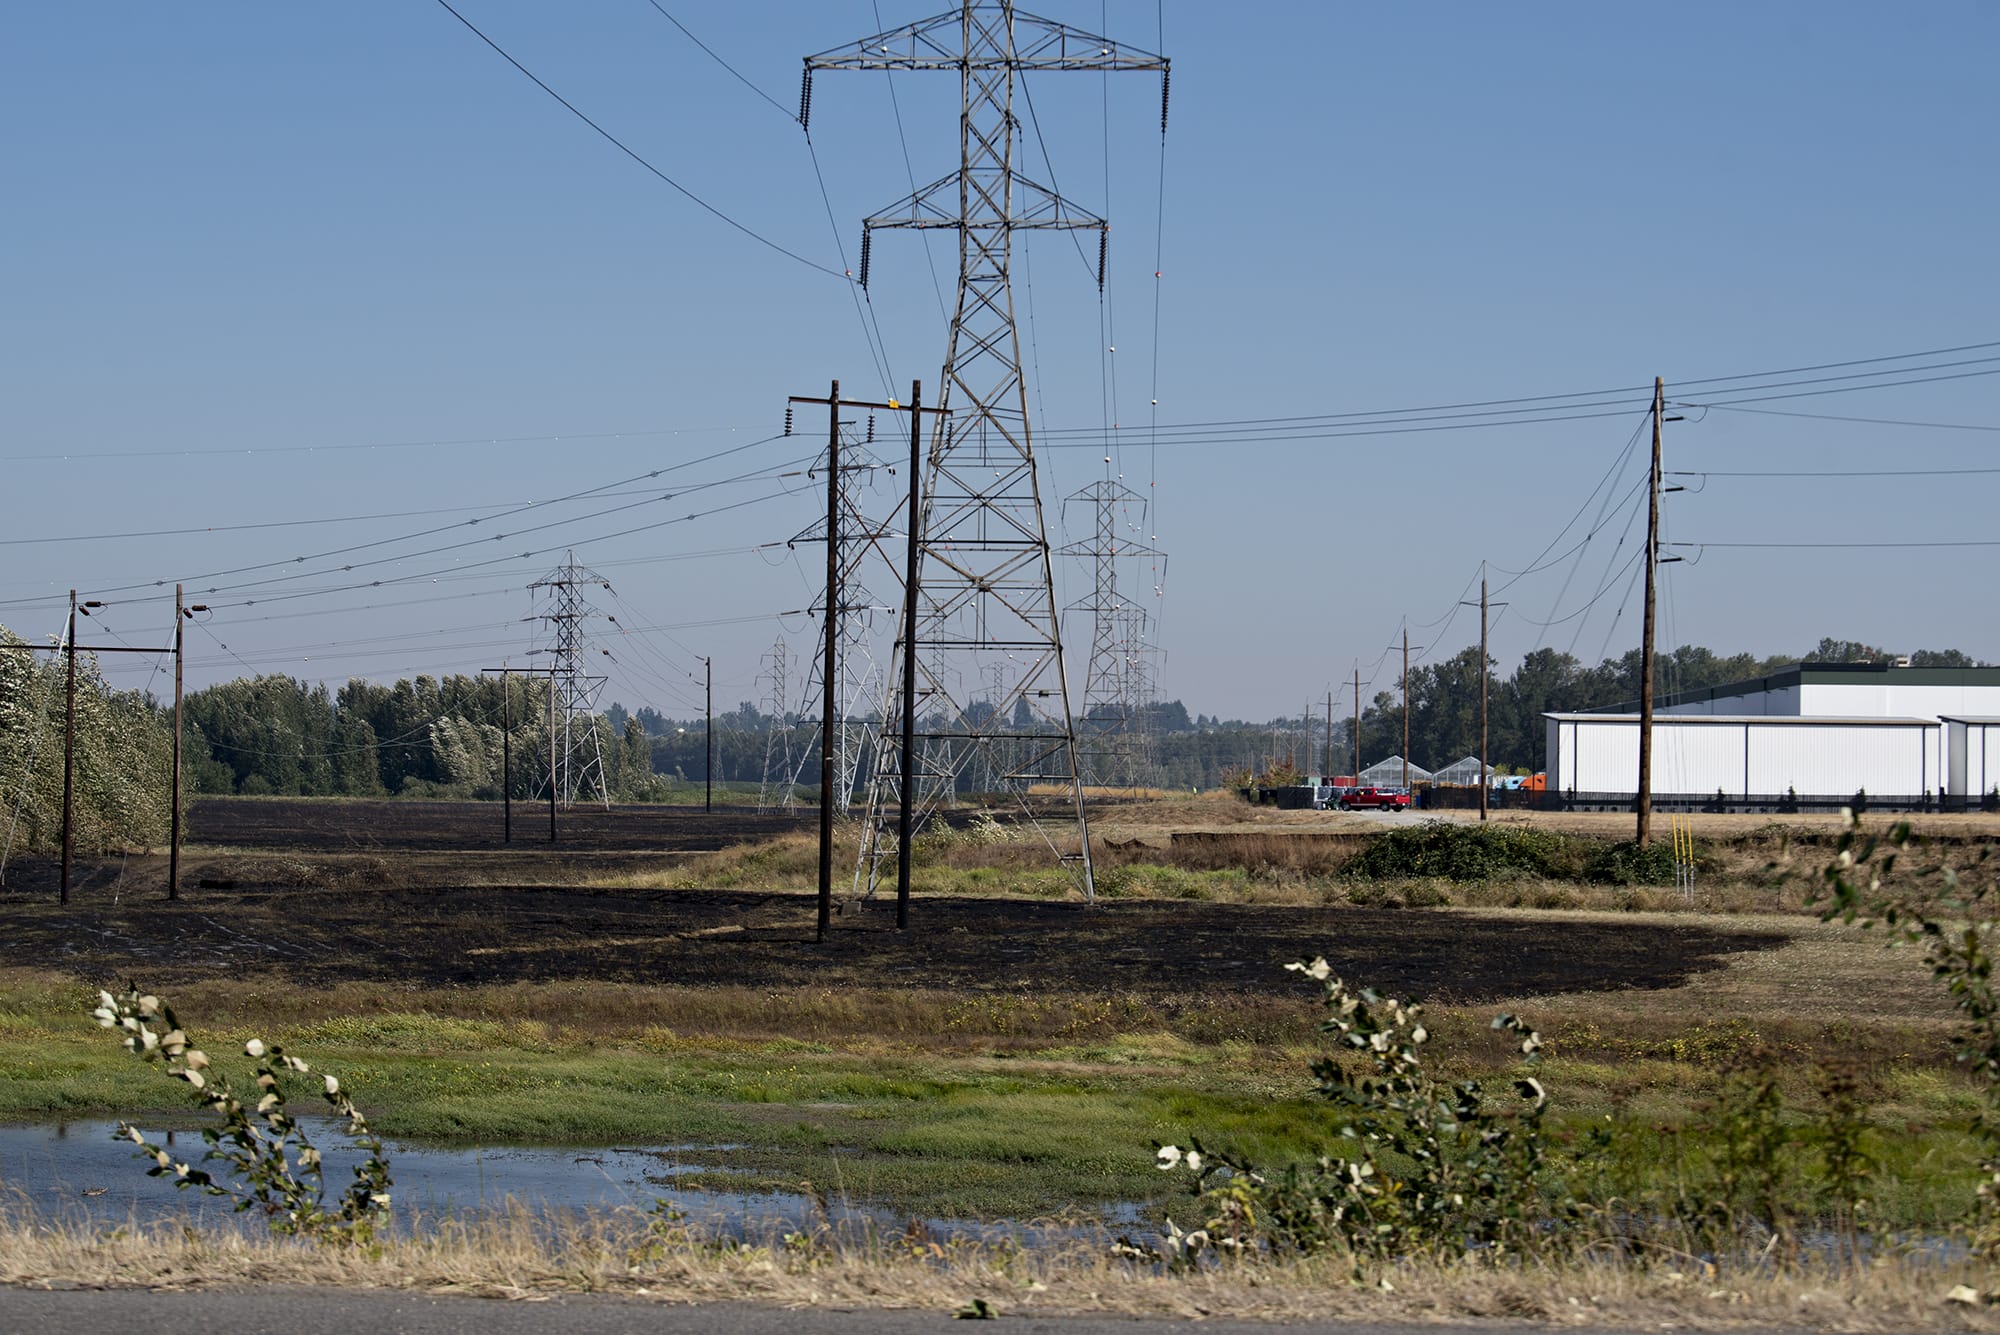 The charred remains of the Fruit Valley fire are seen from Lower River Road on Wednesday morning, Sept. 9, 2020.